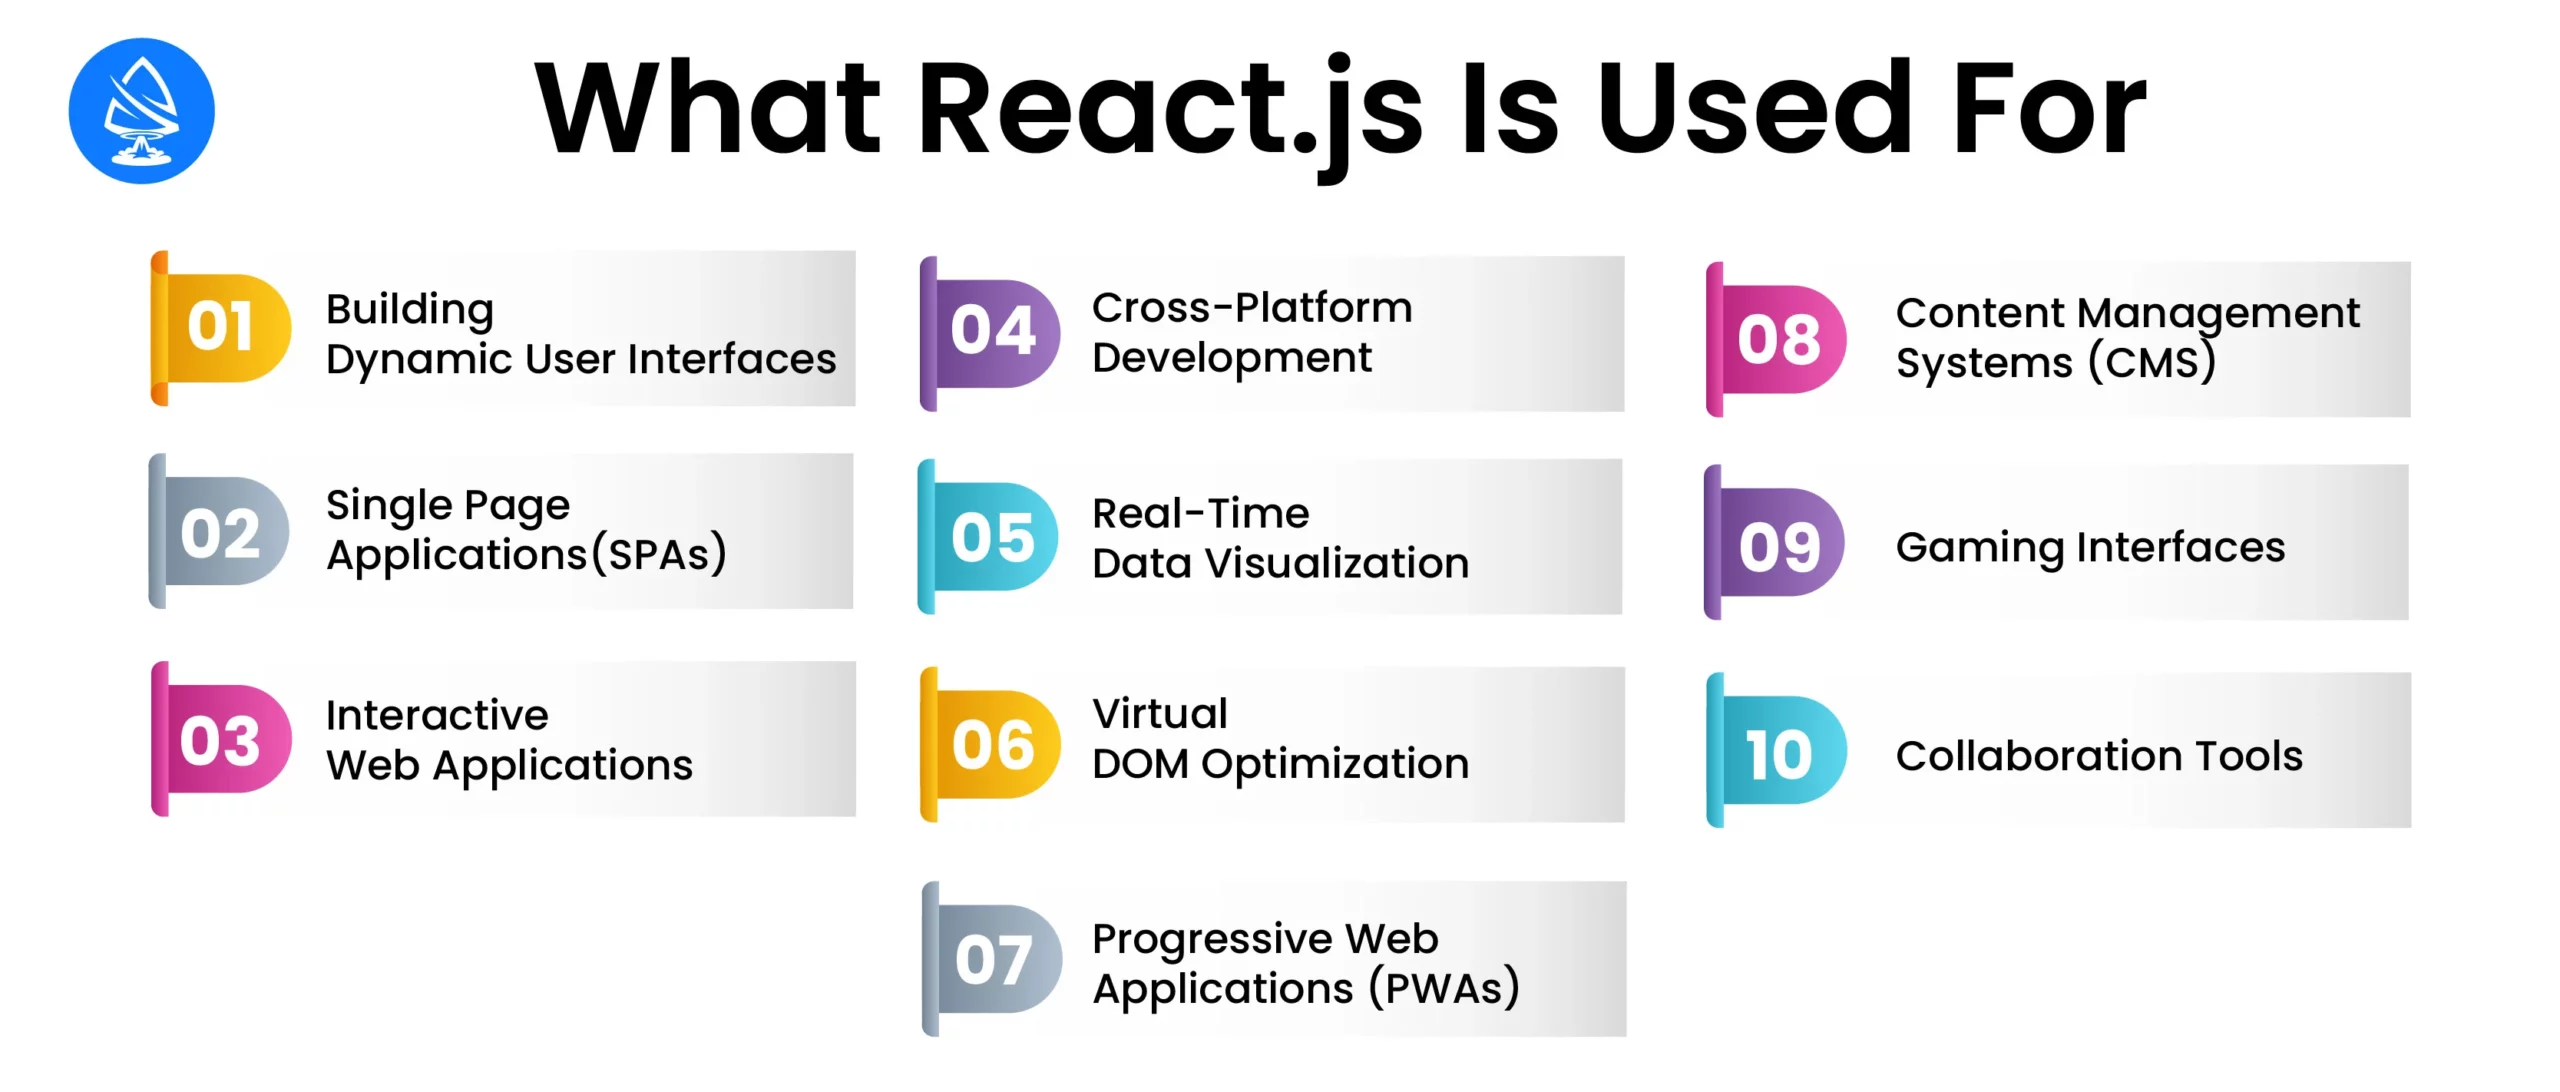 What ReactJS Is Used For